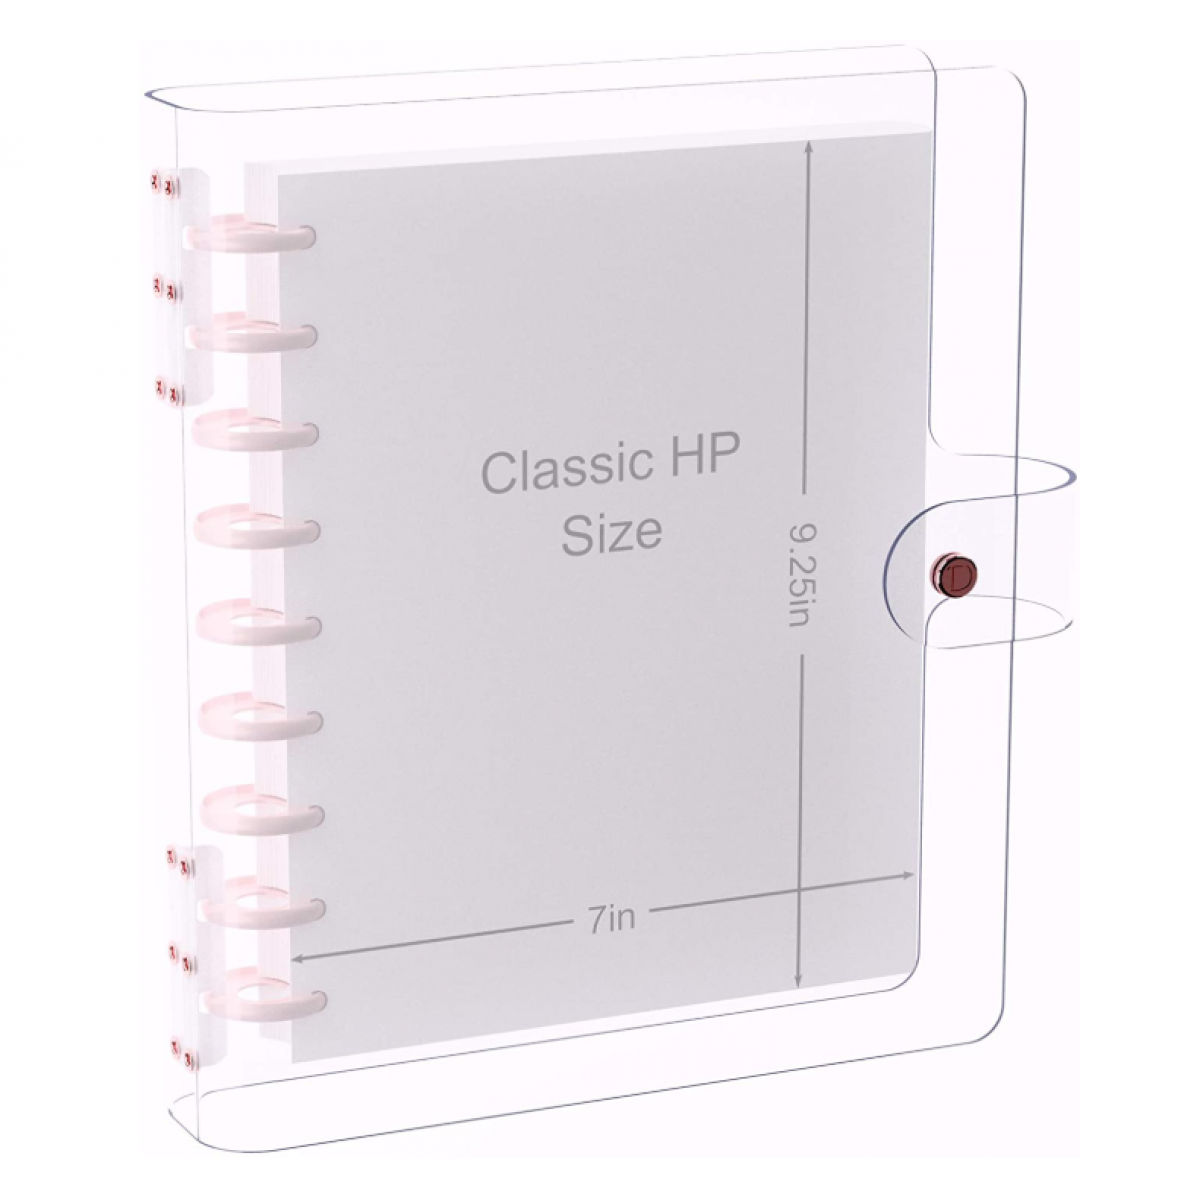 DISCAGENDA CLARITY CLEAR SEE THROUGH PVC PLANNER COVER - DISCBOUND-ROSEGOLD, CLASSIC HP SIZE